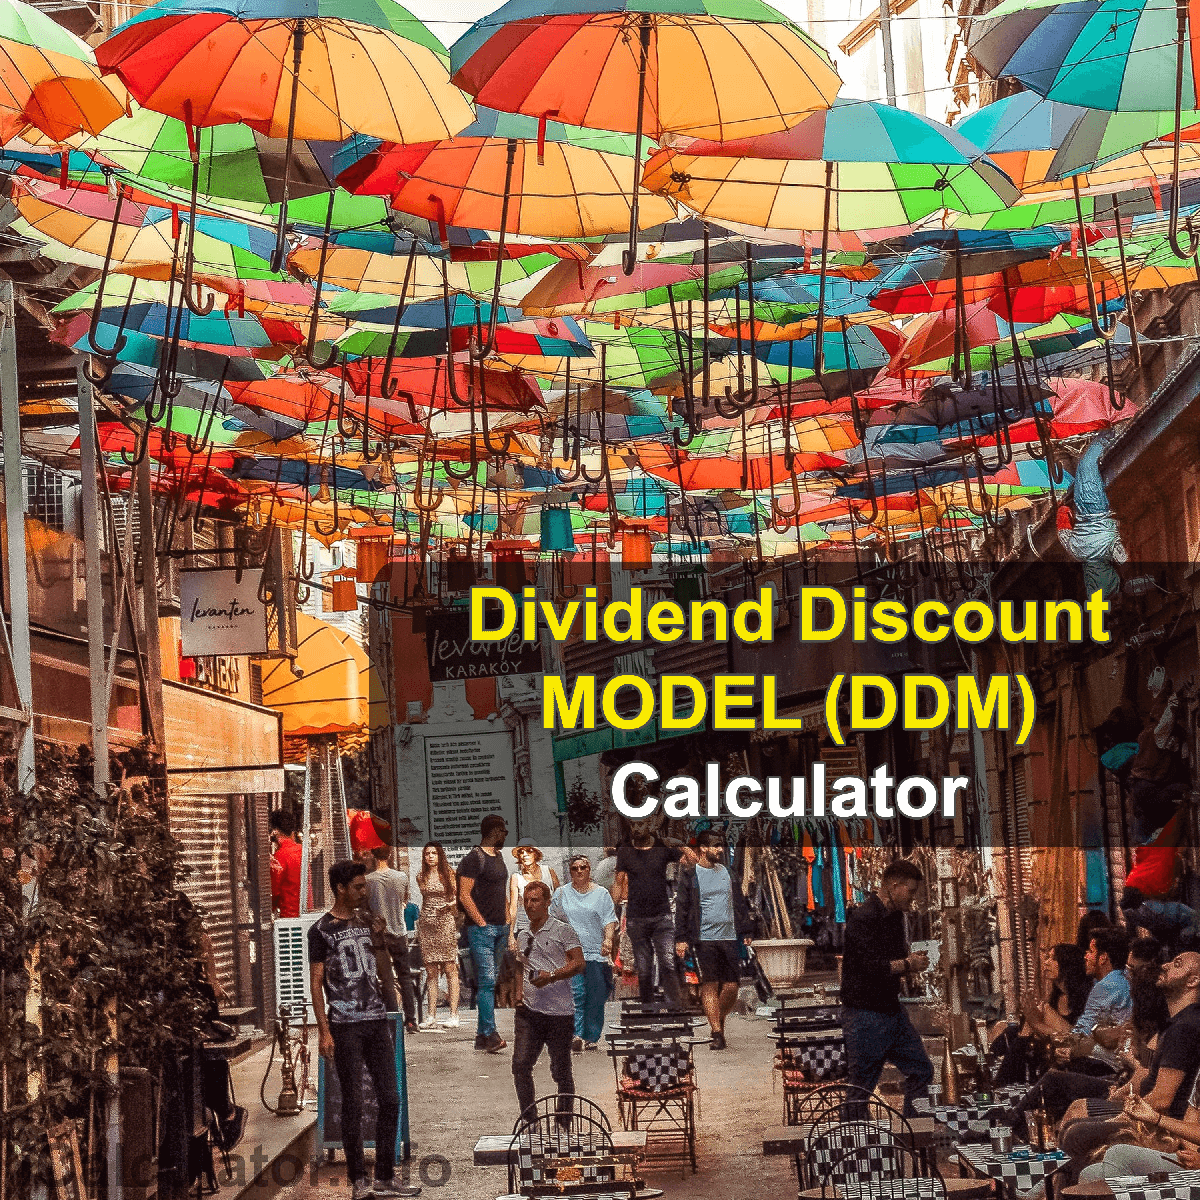 DDM Calculator. This image provides details of how to calculate the dividend discount model using a calculator and notepad. By using the dividend discount model formula, the Dividend Discount Model Calculator provides a true calculation of the current value of a company's stock is the sum of all its future dividend payments when discounted back to their present value.